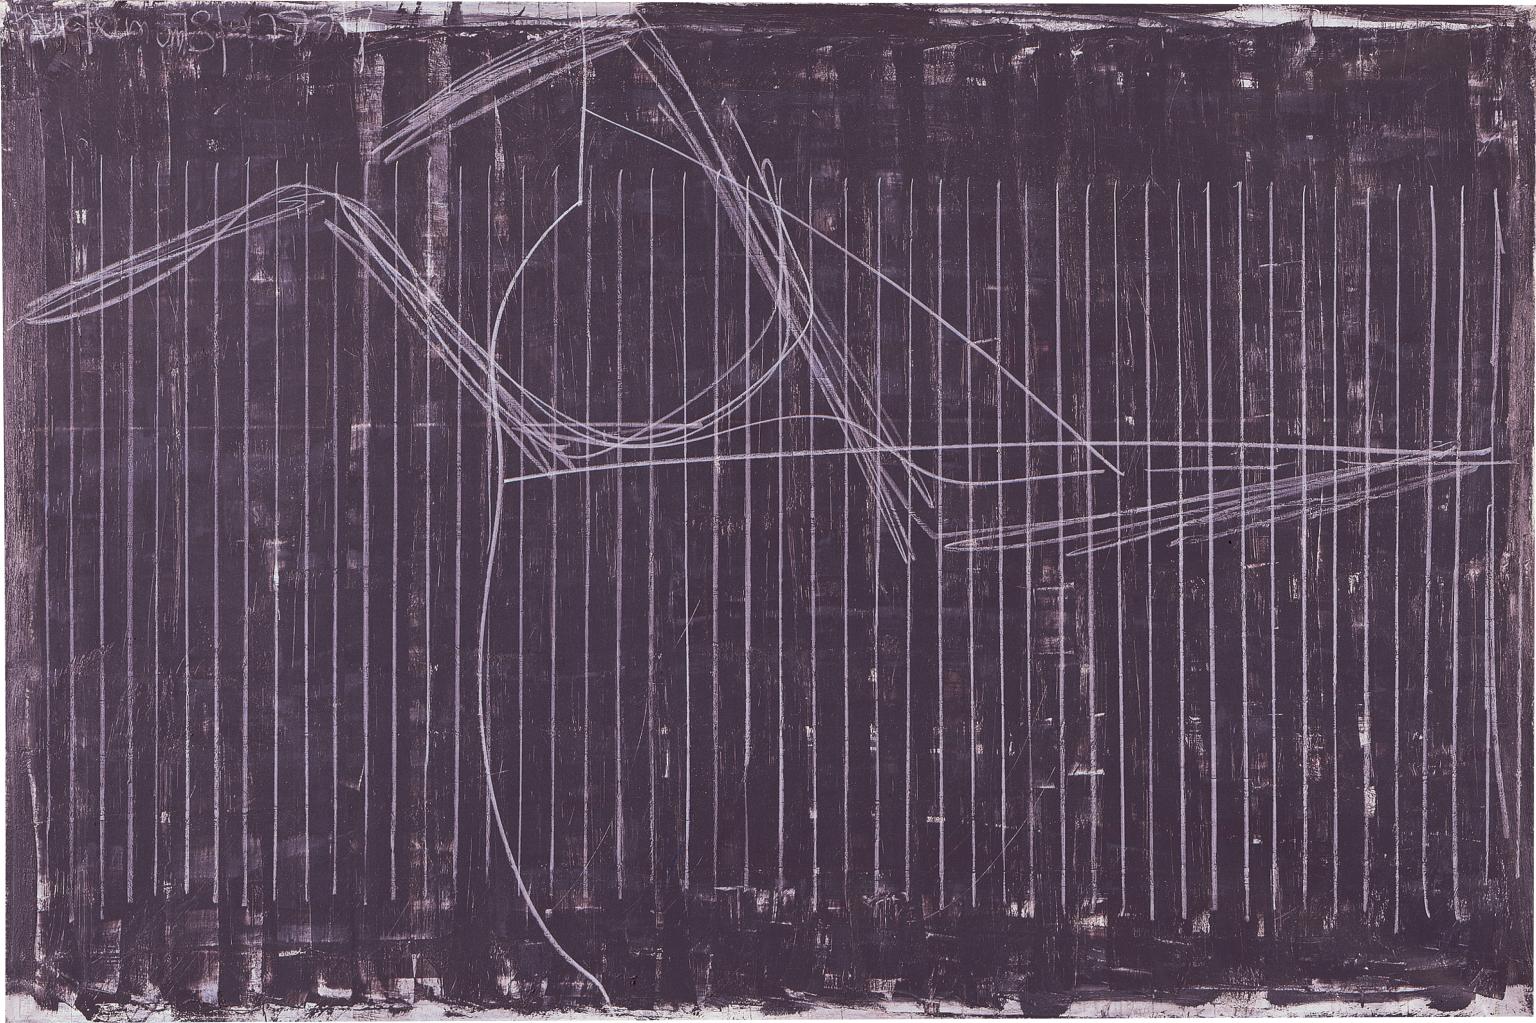 Painting featuring vertical serial lines with horizontal and tangled lines.